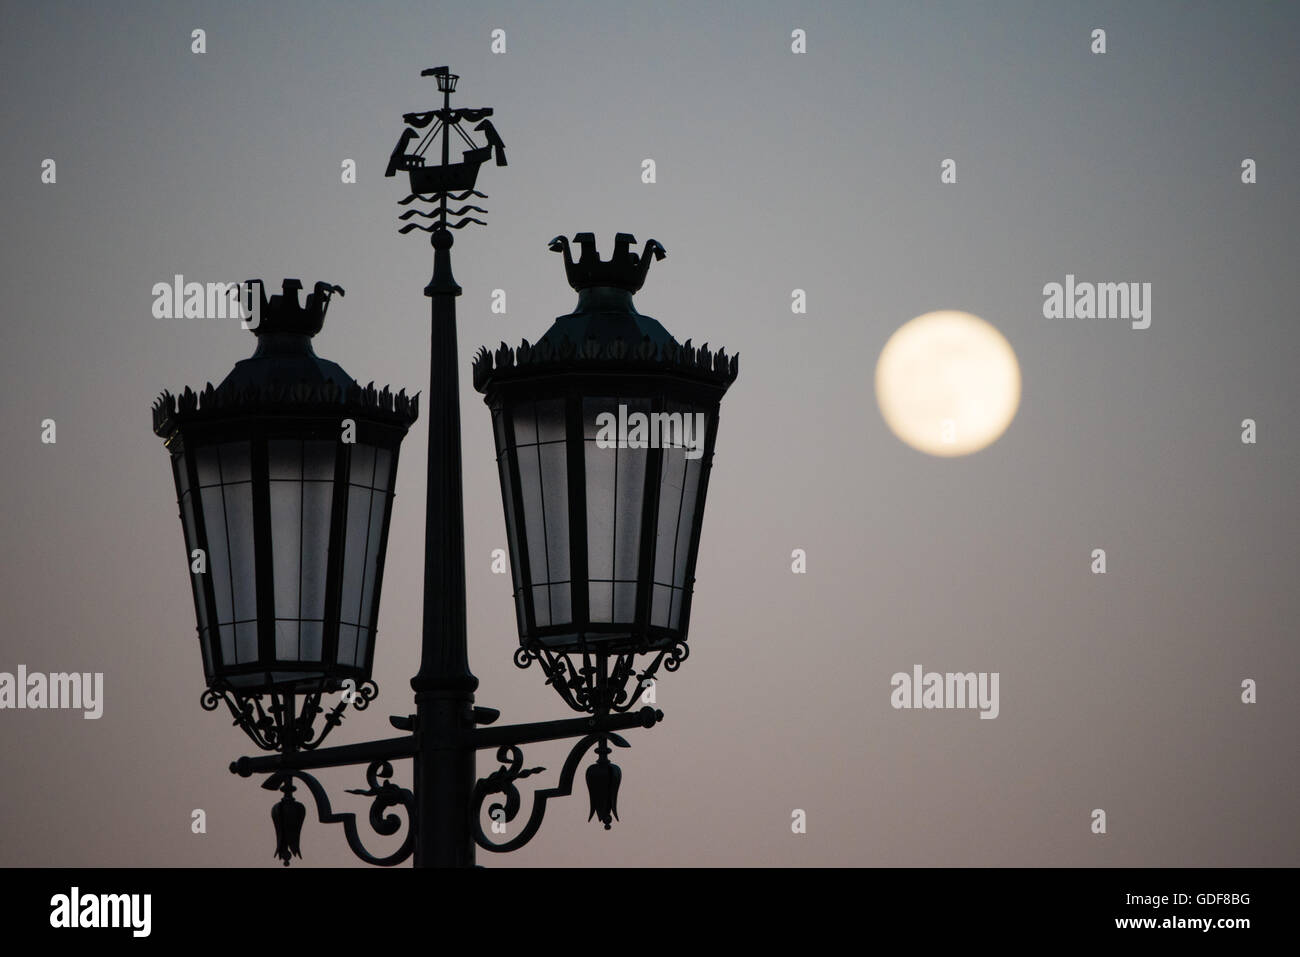 LISBON, Portugal - Silhouette of a street light on Praça do Comércio, with the full moon in the background. Known as Commerce Square in English, Praça do Comércio is an historic square in the Pombaline Downtown district of Lisbon, next to the Tagus River. Stock Photo